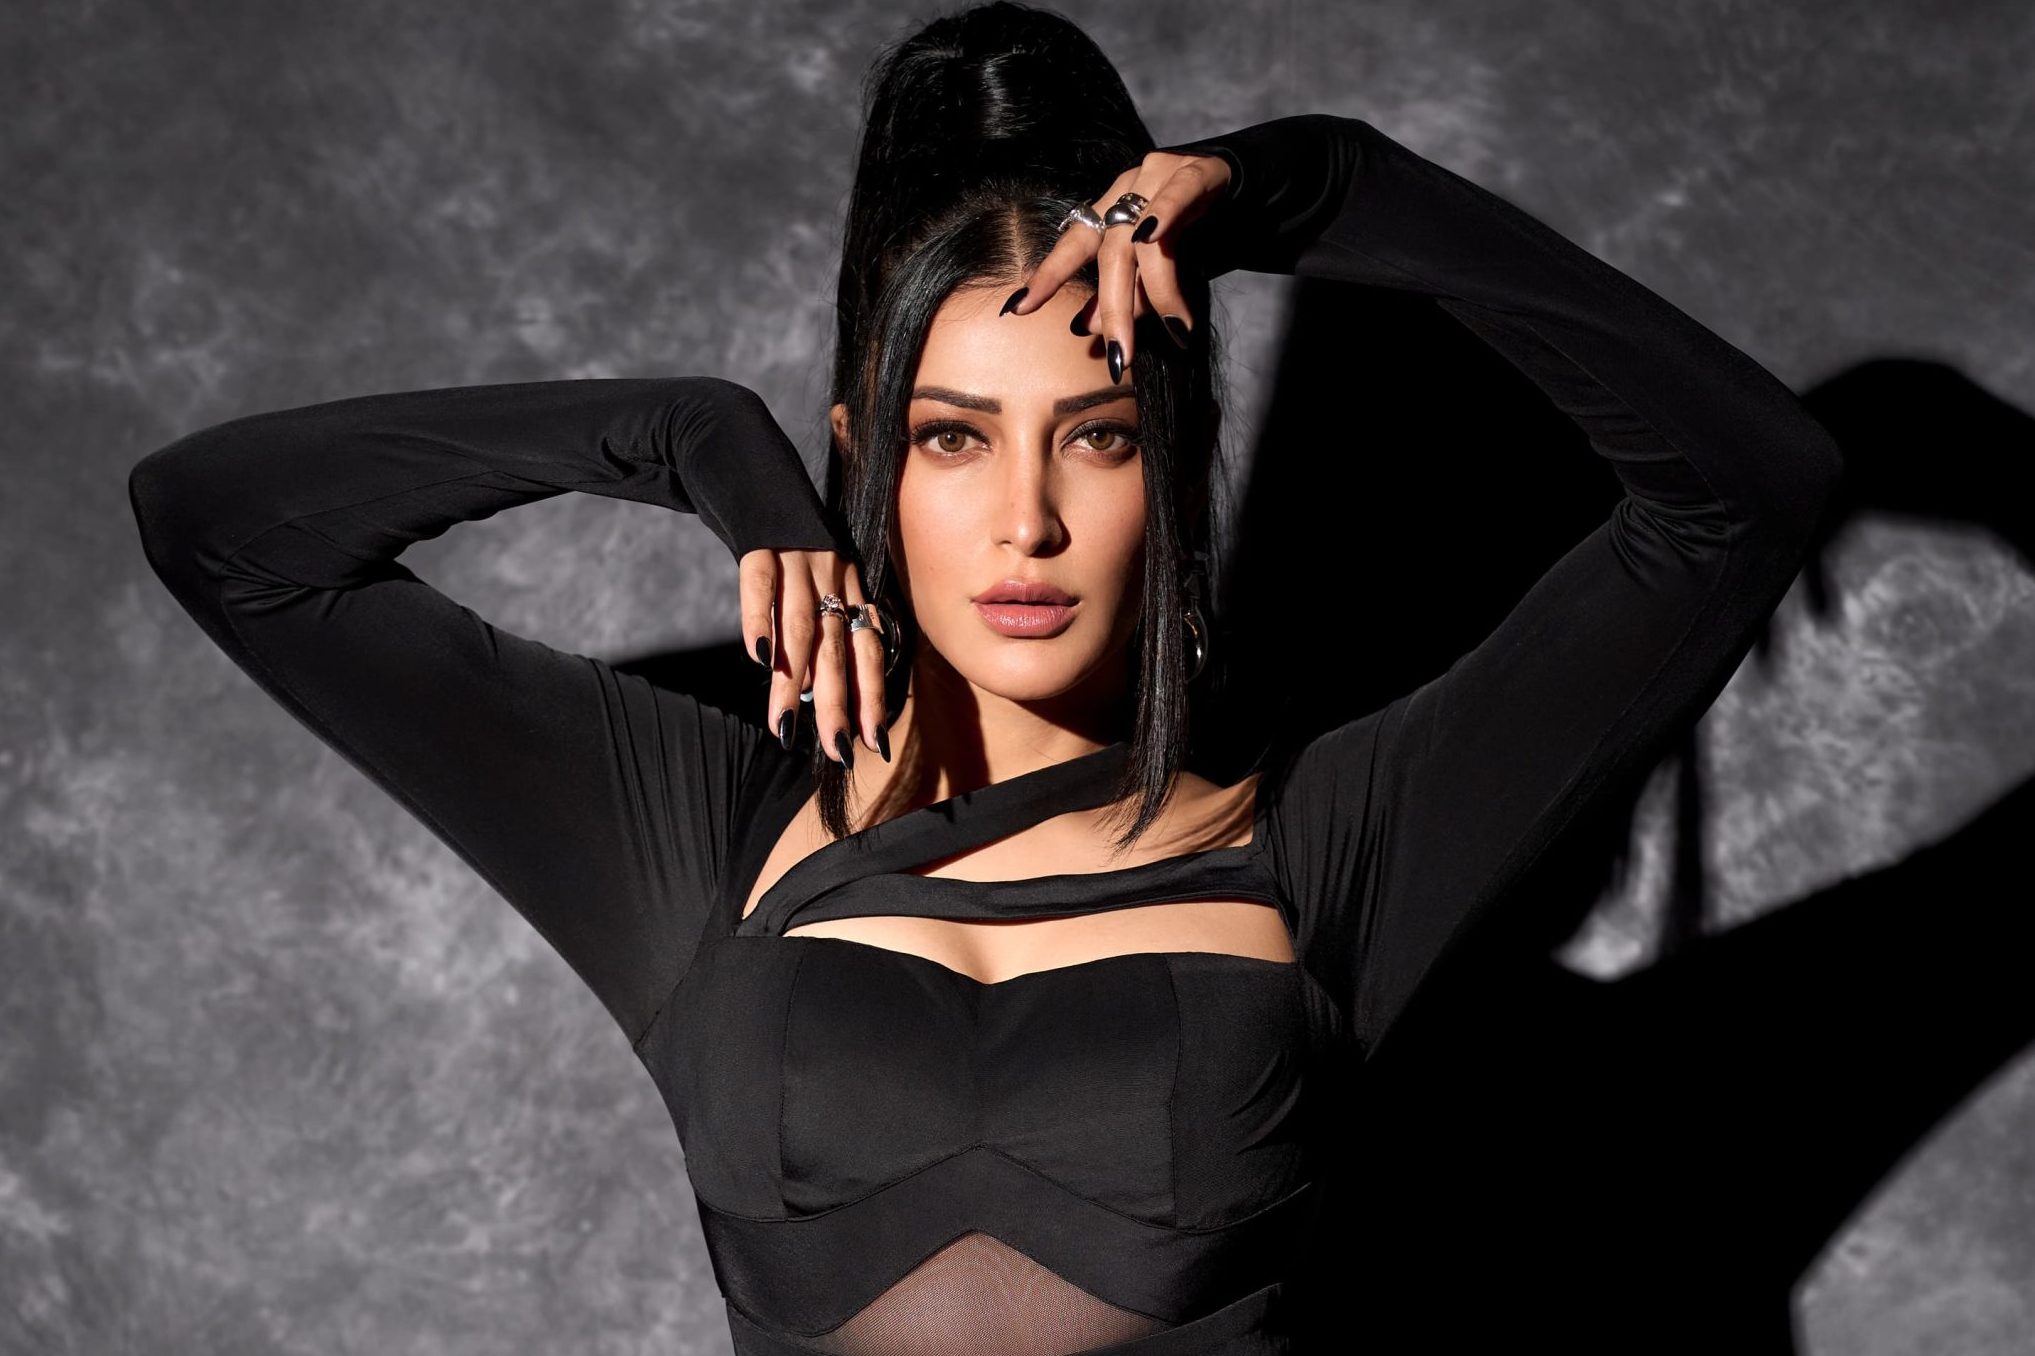 Shruti Hassan’s recently released track ‘Inimel’ crosses 10 Million views on YouTube